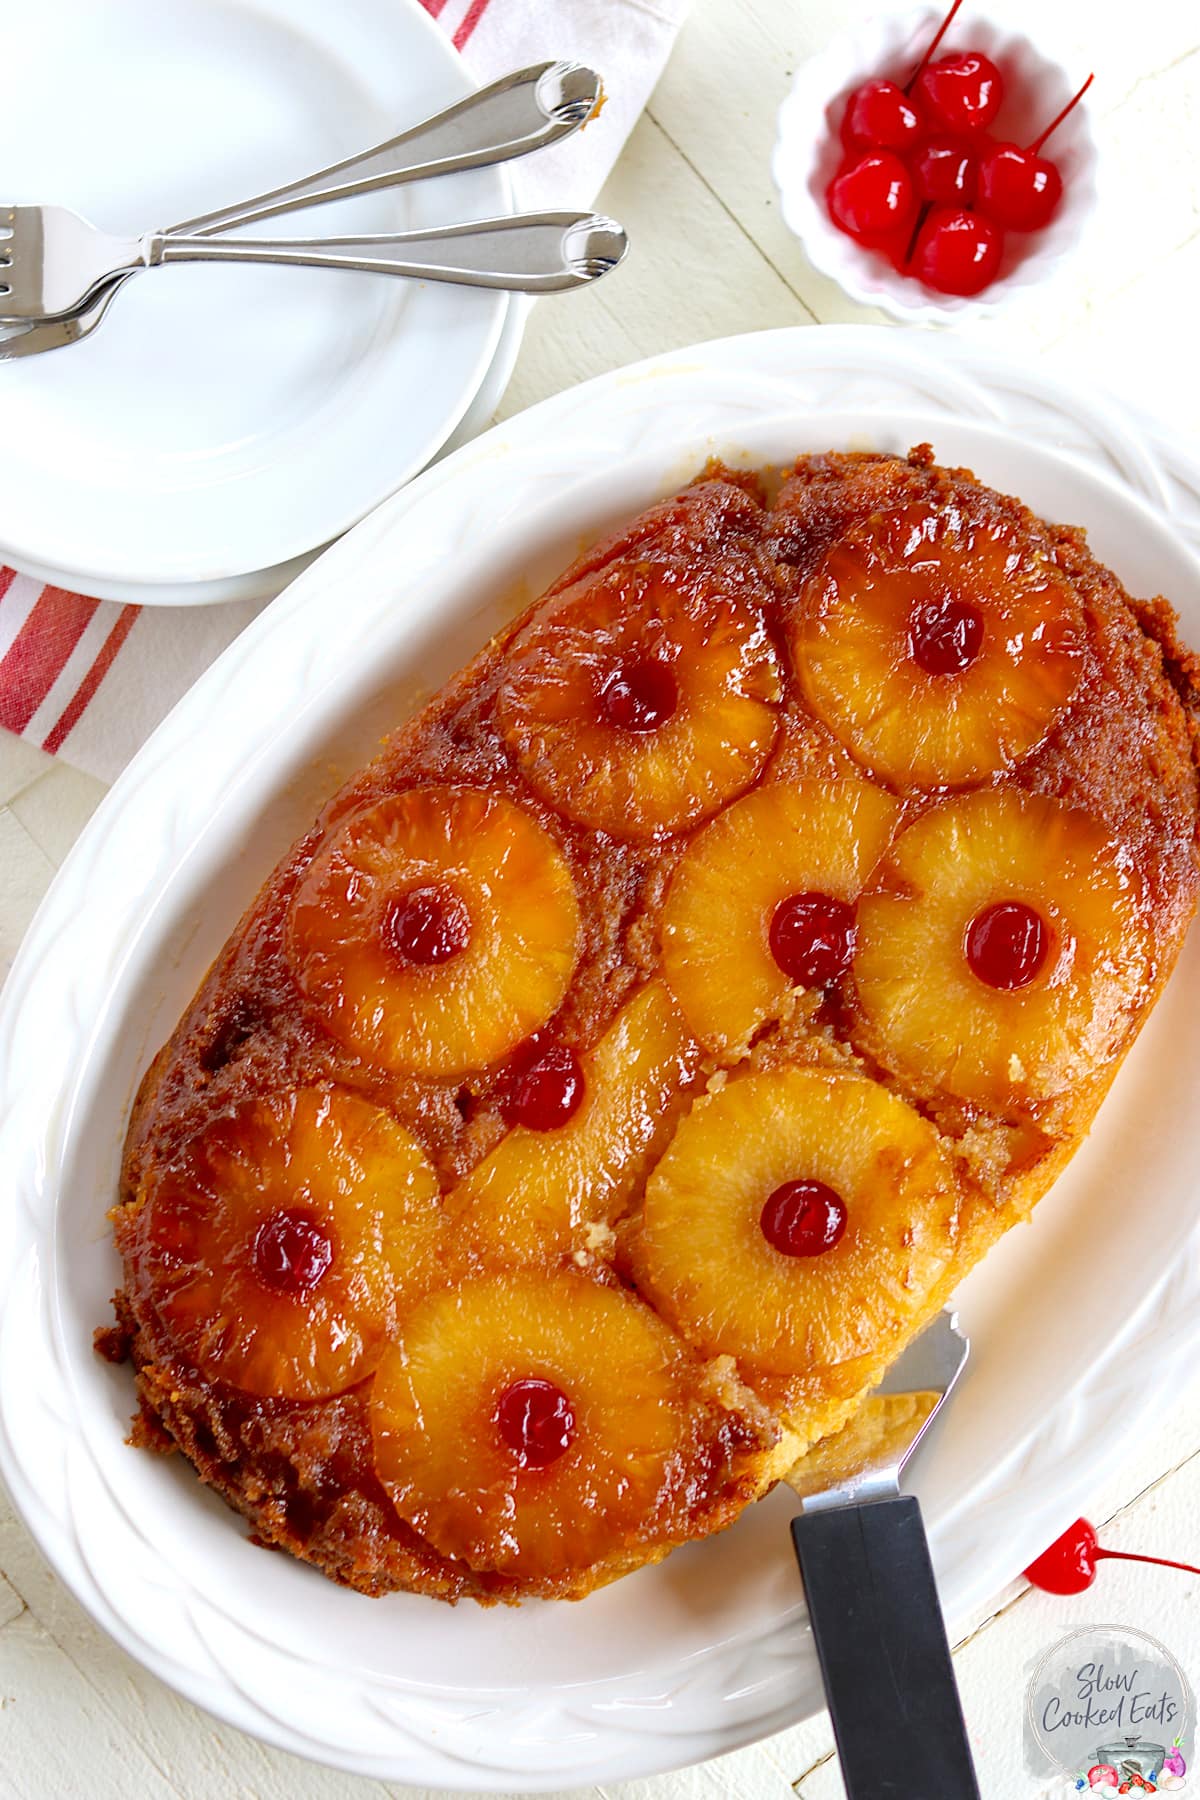 Pineapple upside down cake on a white plate with a serving spatula and a side of cherries.